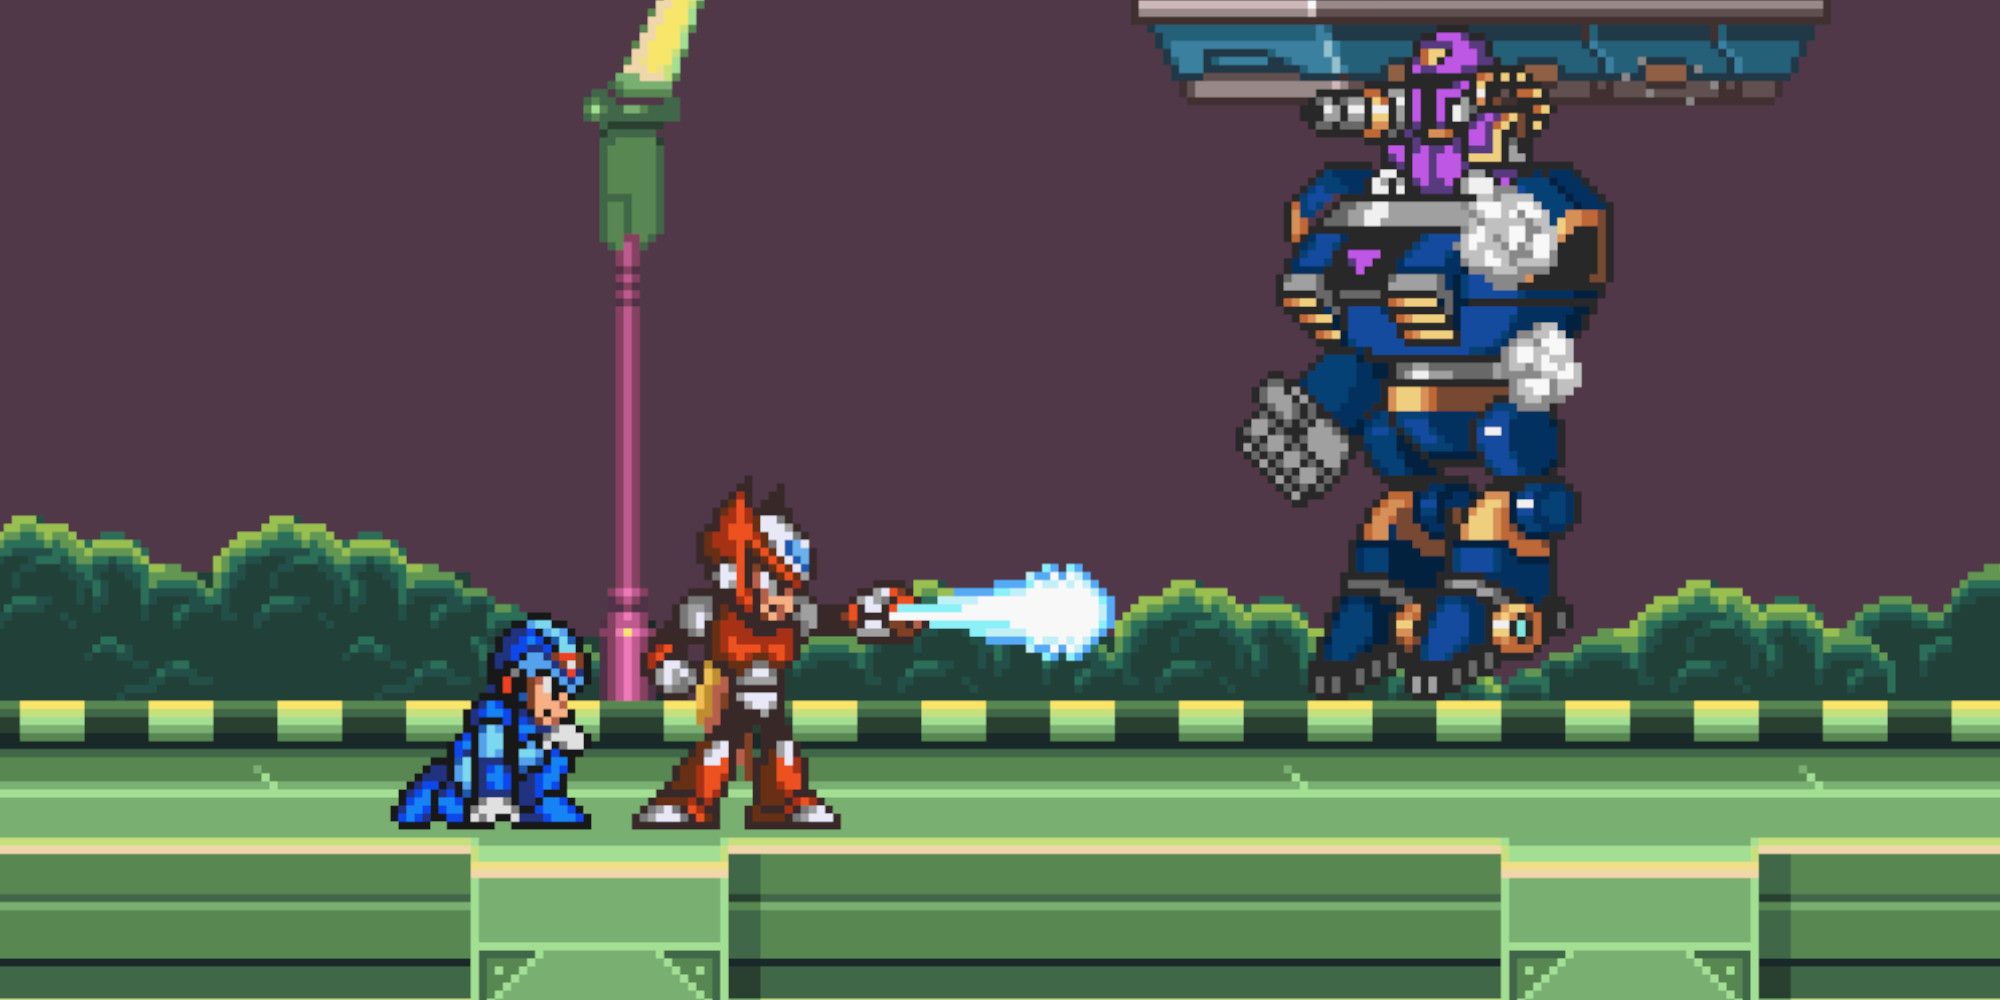 X and Zero in the first level of Mega Man X